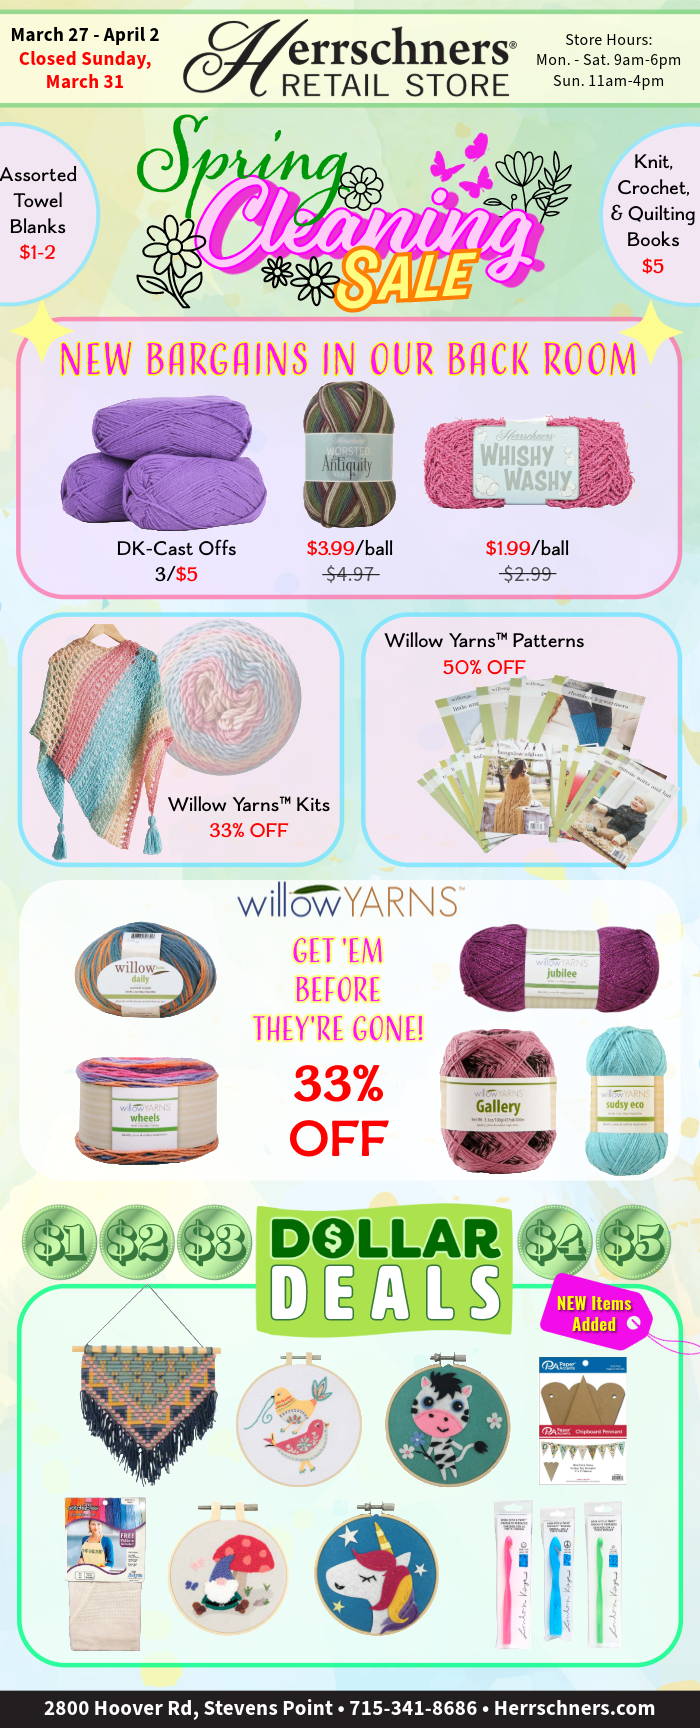 Current Retail Store Specials: Spring Cleaning Sale! New Items Added to our Back Room and Dollar Deals! Image: Featured Yarns and Kits.